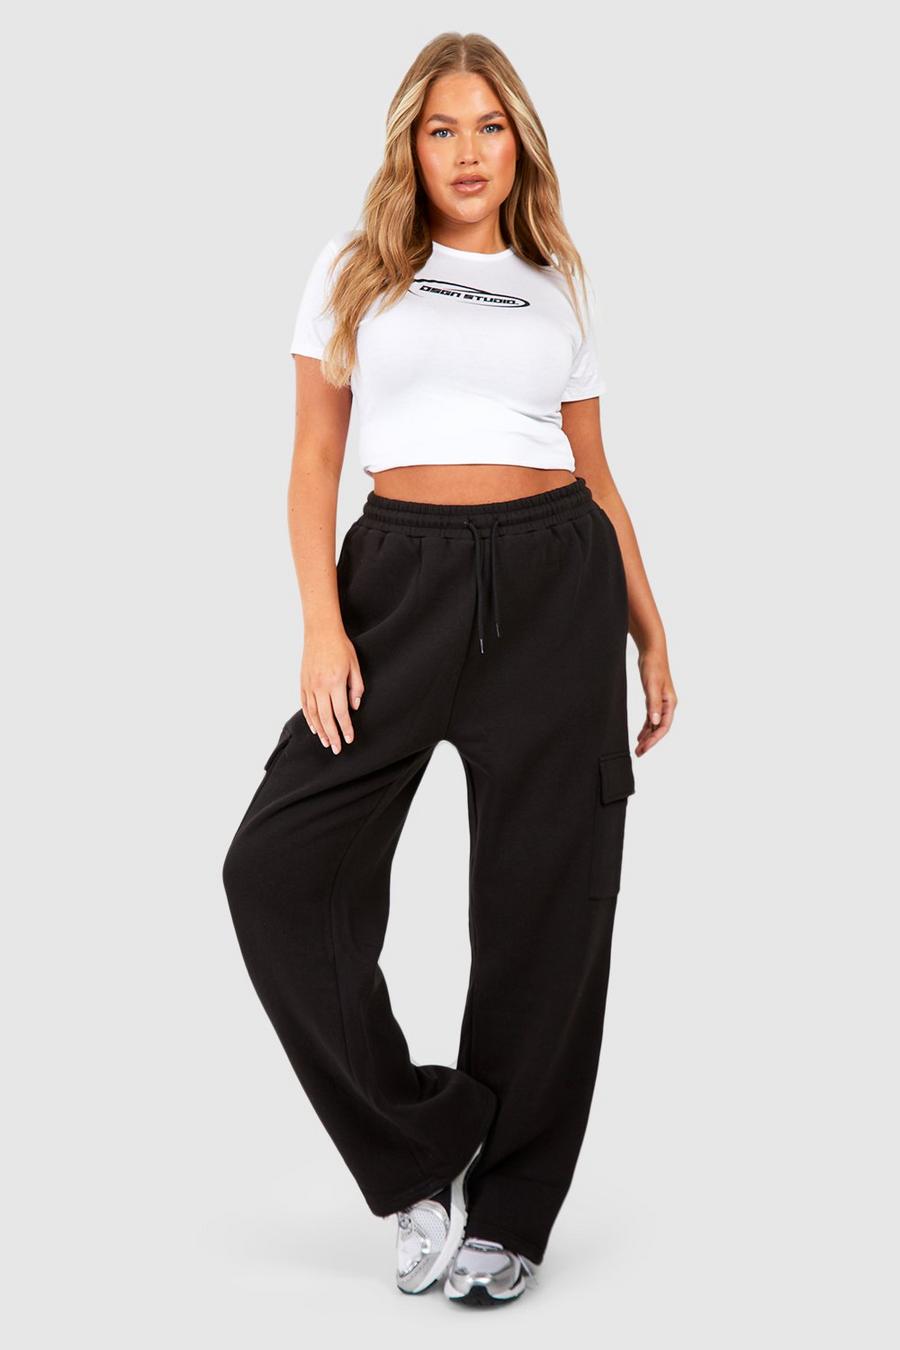  Women's Sweatpants Baggy Solid Color Plus Size Joggers Pants  Comfy Wide Leg Sweatpant with Pockets Juniors Clothing Black Sweatpants  Women Women Winter Outfits Small Black : Clothing, Shoes & Jewelry